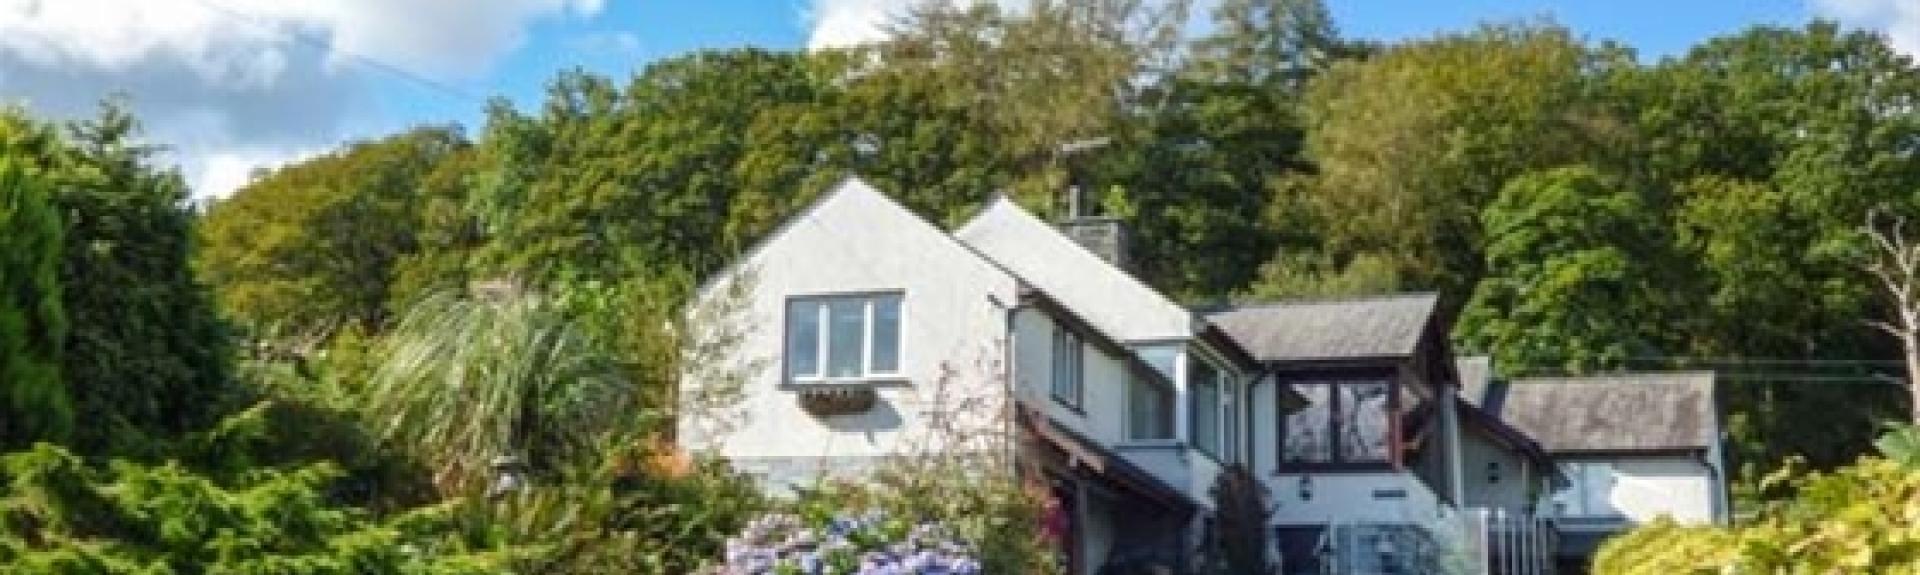 A large Coniston holiday home at the head of a hedge-lined tarmac drive with a mature woodland background.